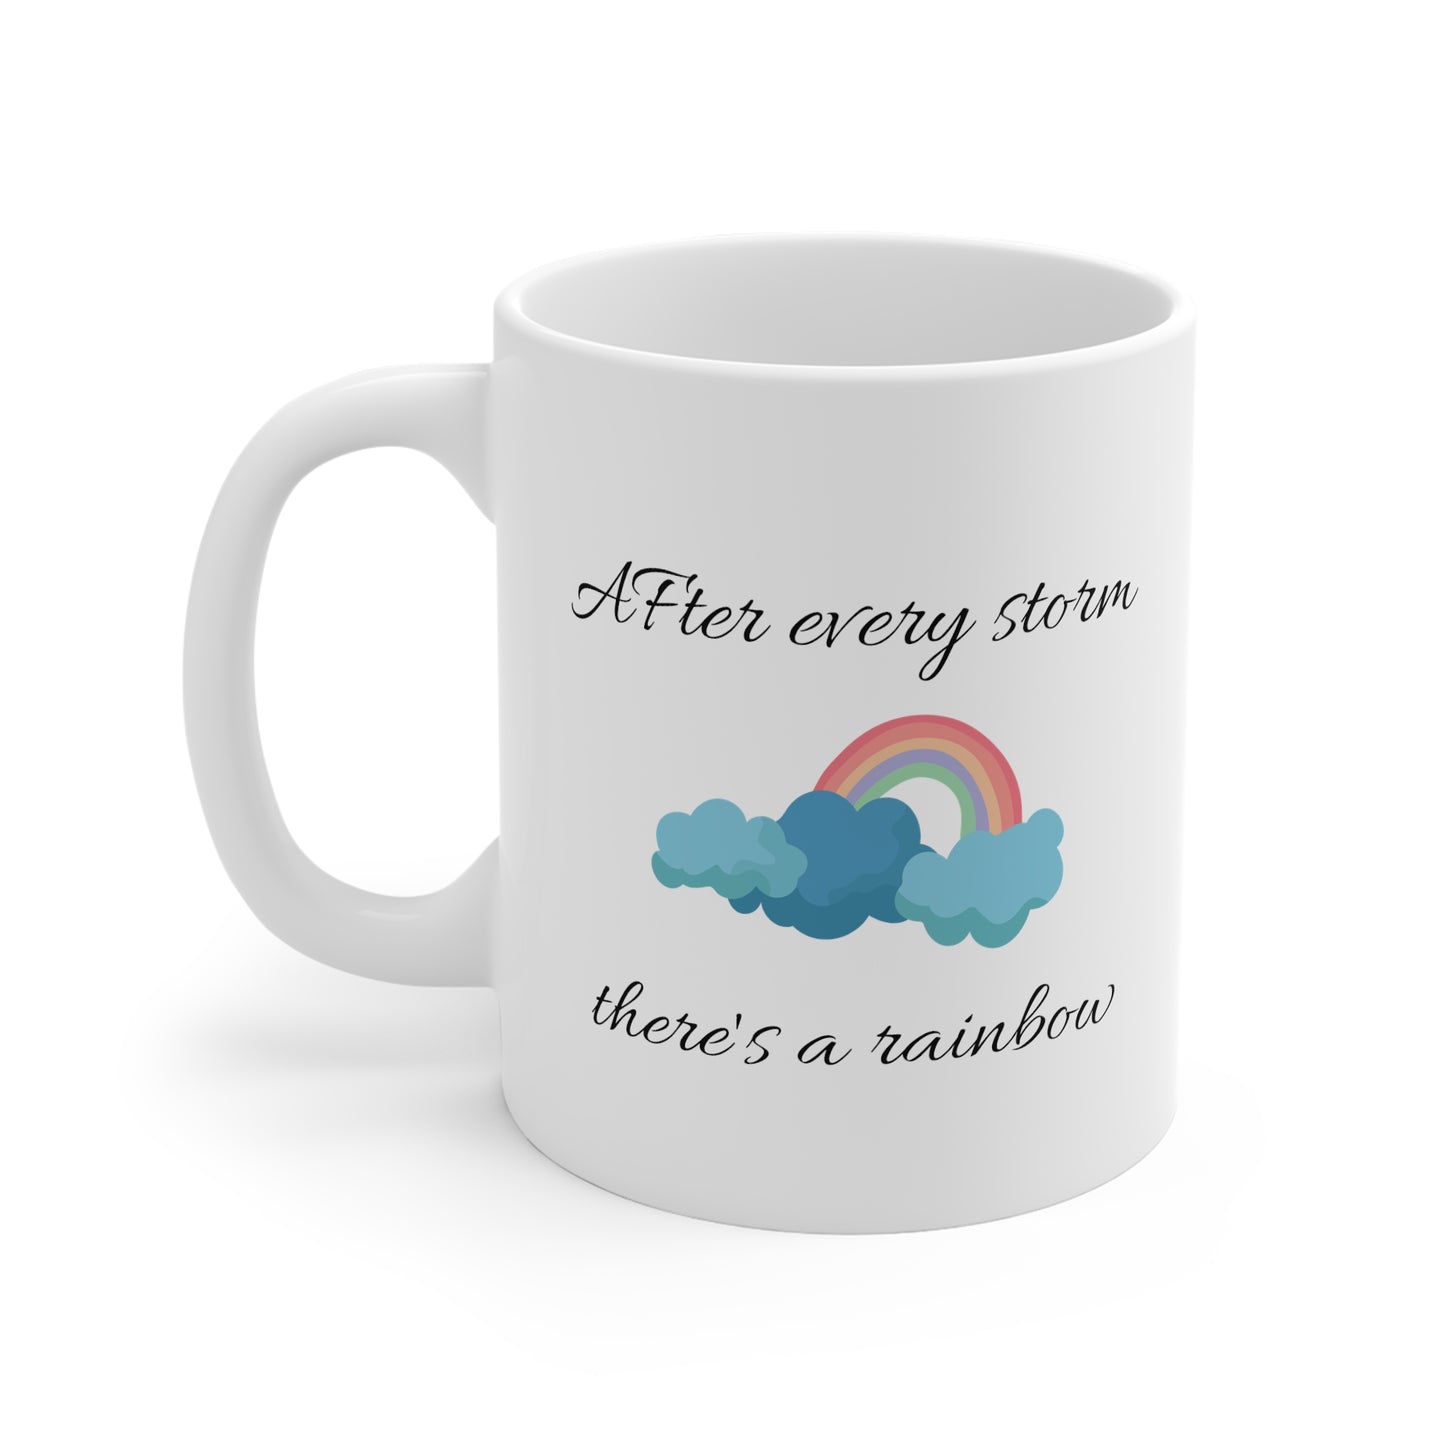 After every storm, there's a rainbow, Mug